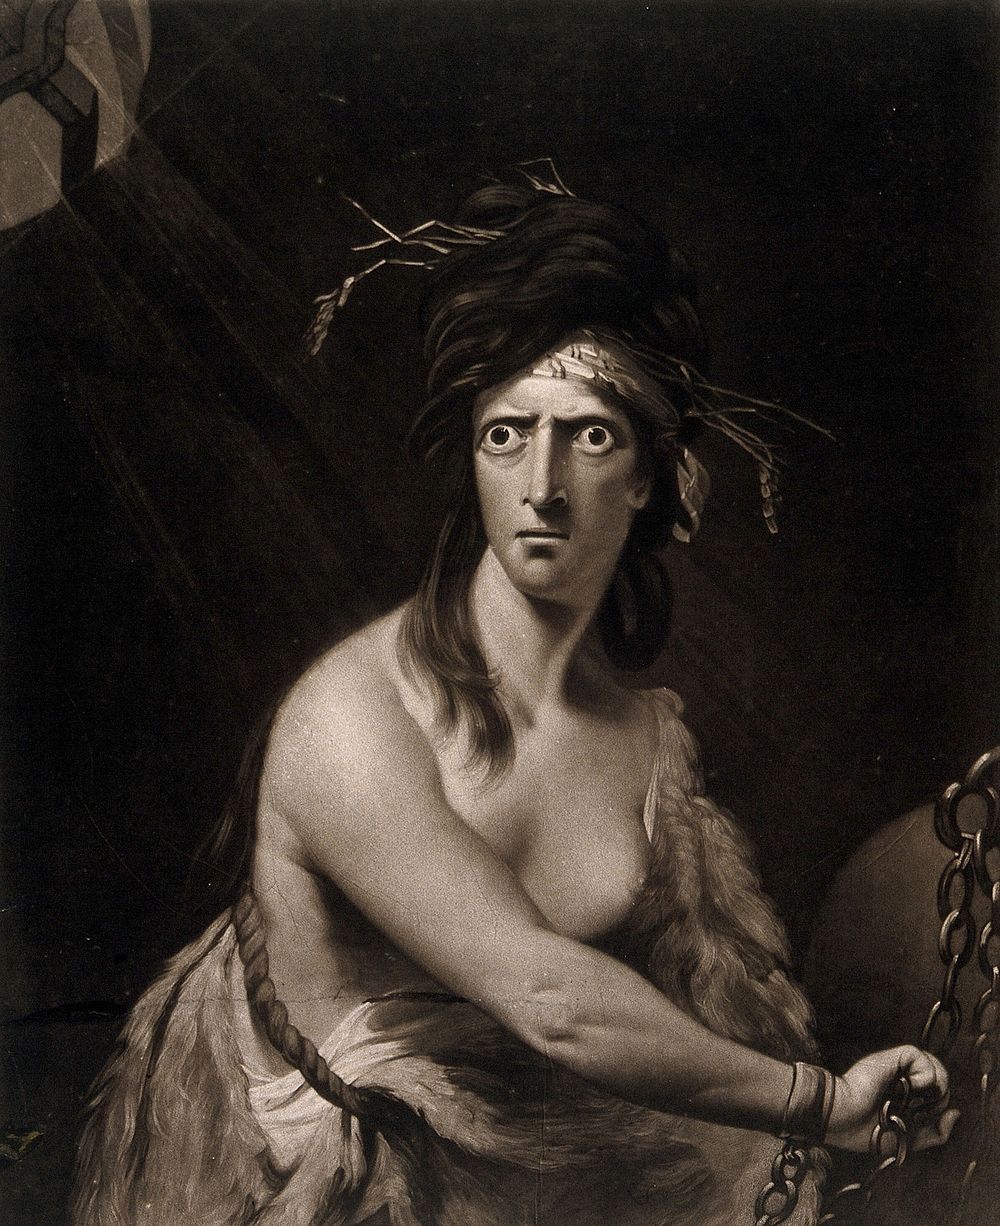 A distraught bare-breasted woman with staring eyes, straw in her hair and chained wrists, representing madness. Mezzotint by…